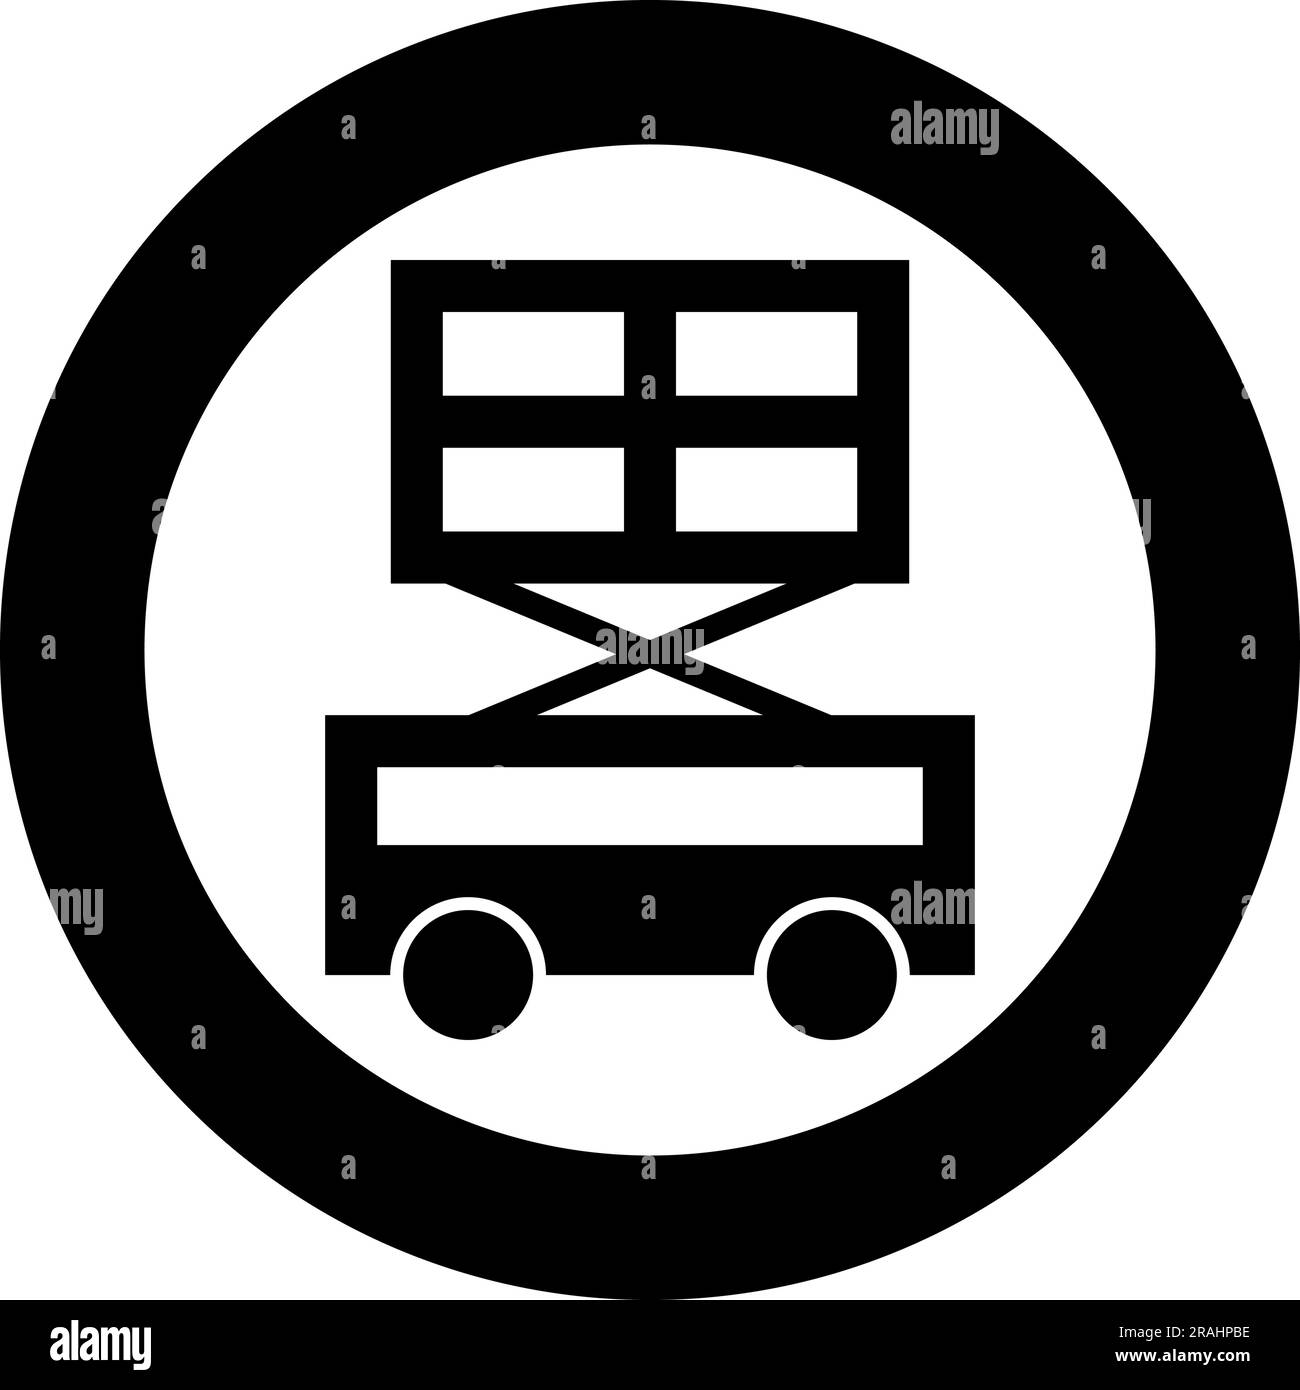 Lifting machine scissor lift platform self propelled icon in circle round black color vector illustration image solid outline style simple Stock Vector